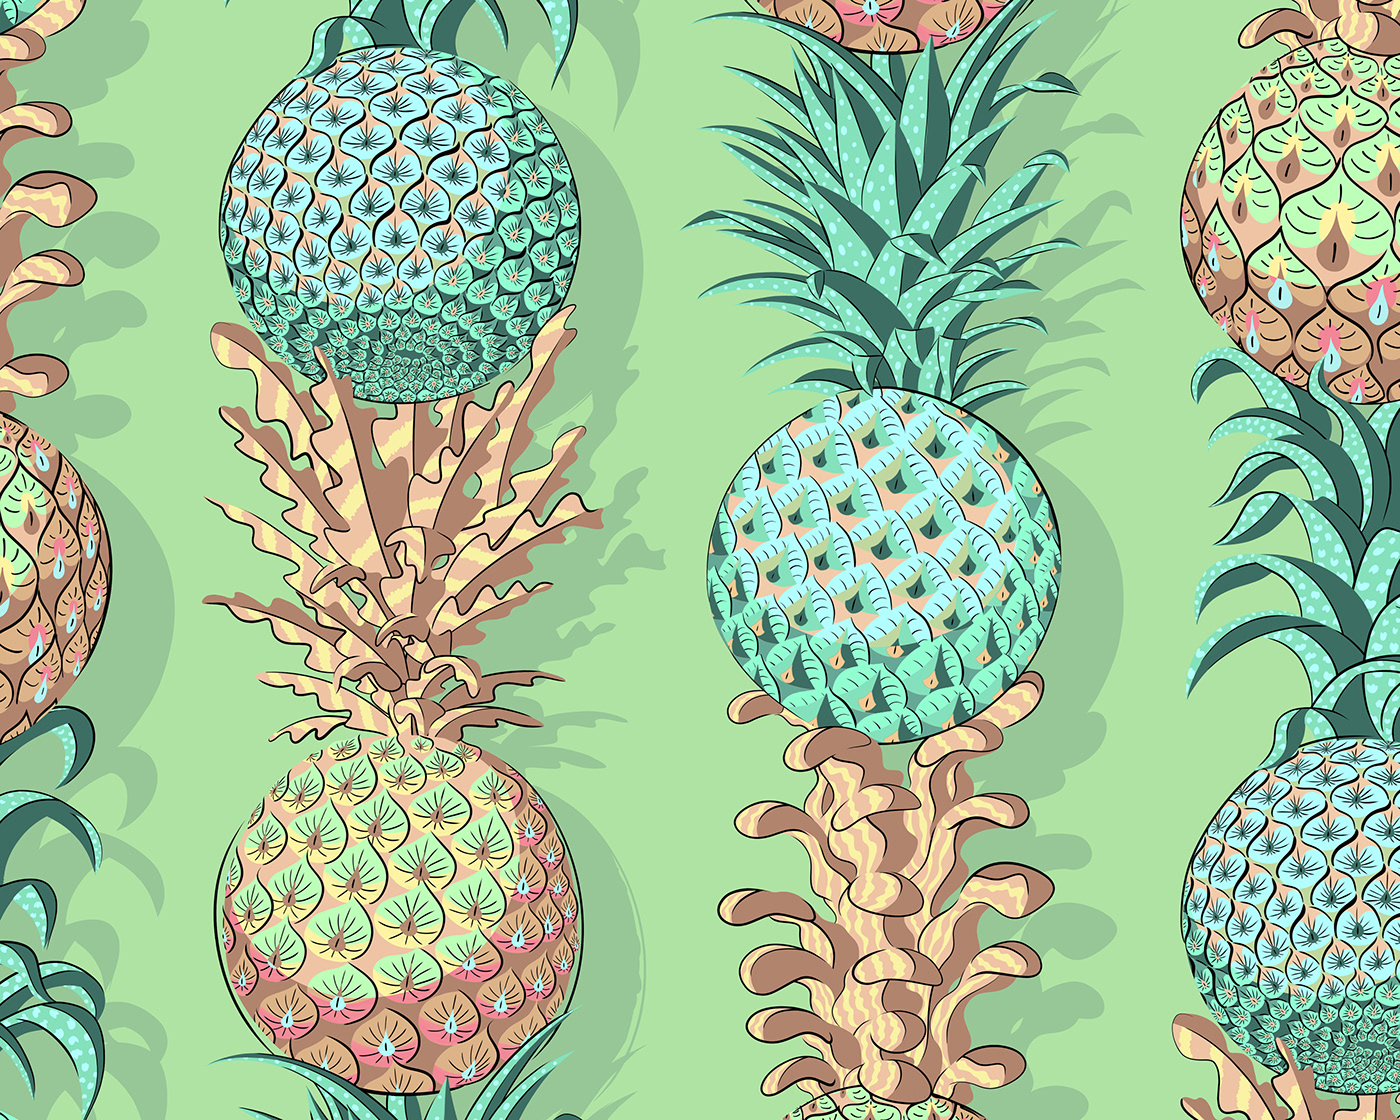 Finely-detailed digital illustration depicting stacks of pineapples in a repeat pattern.